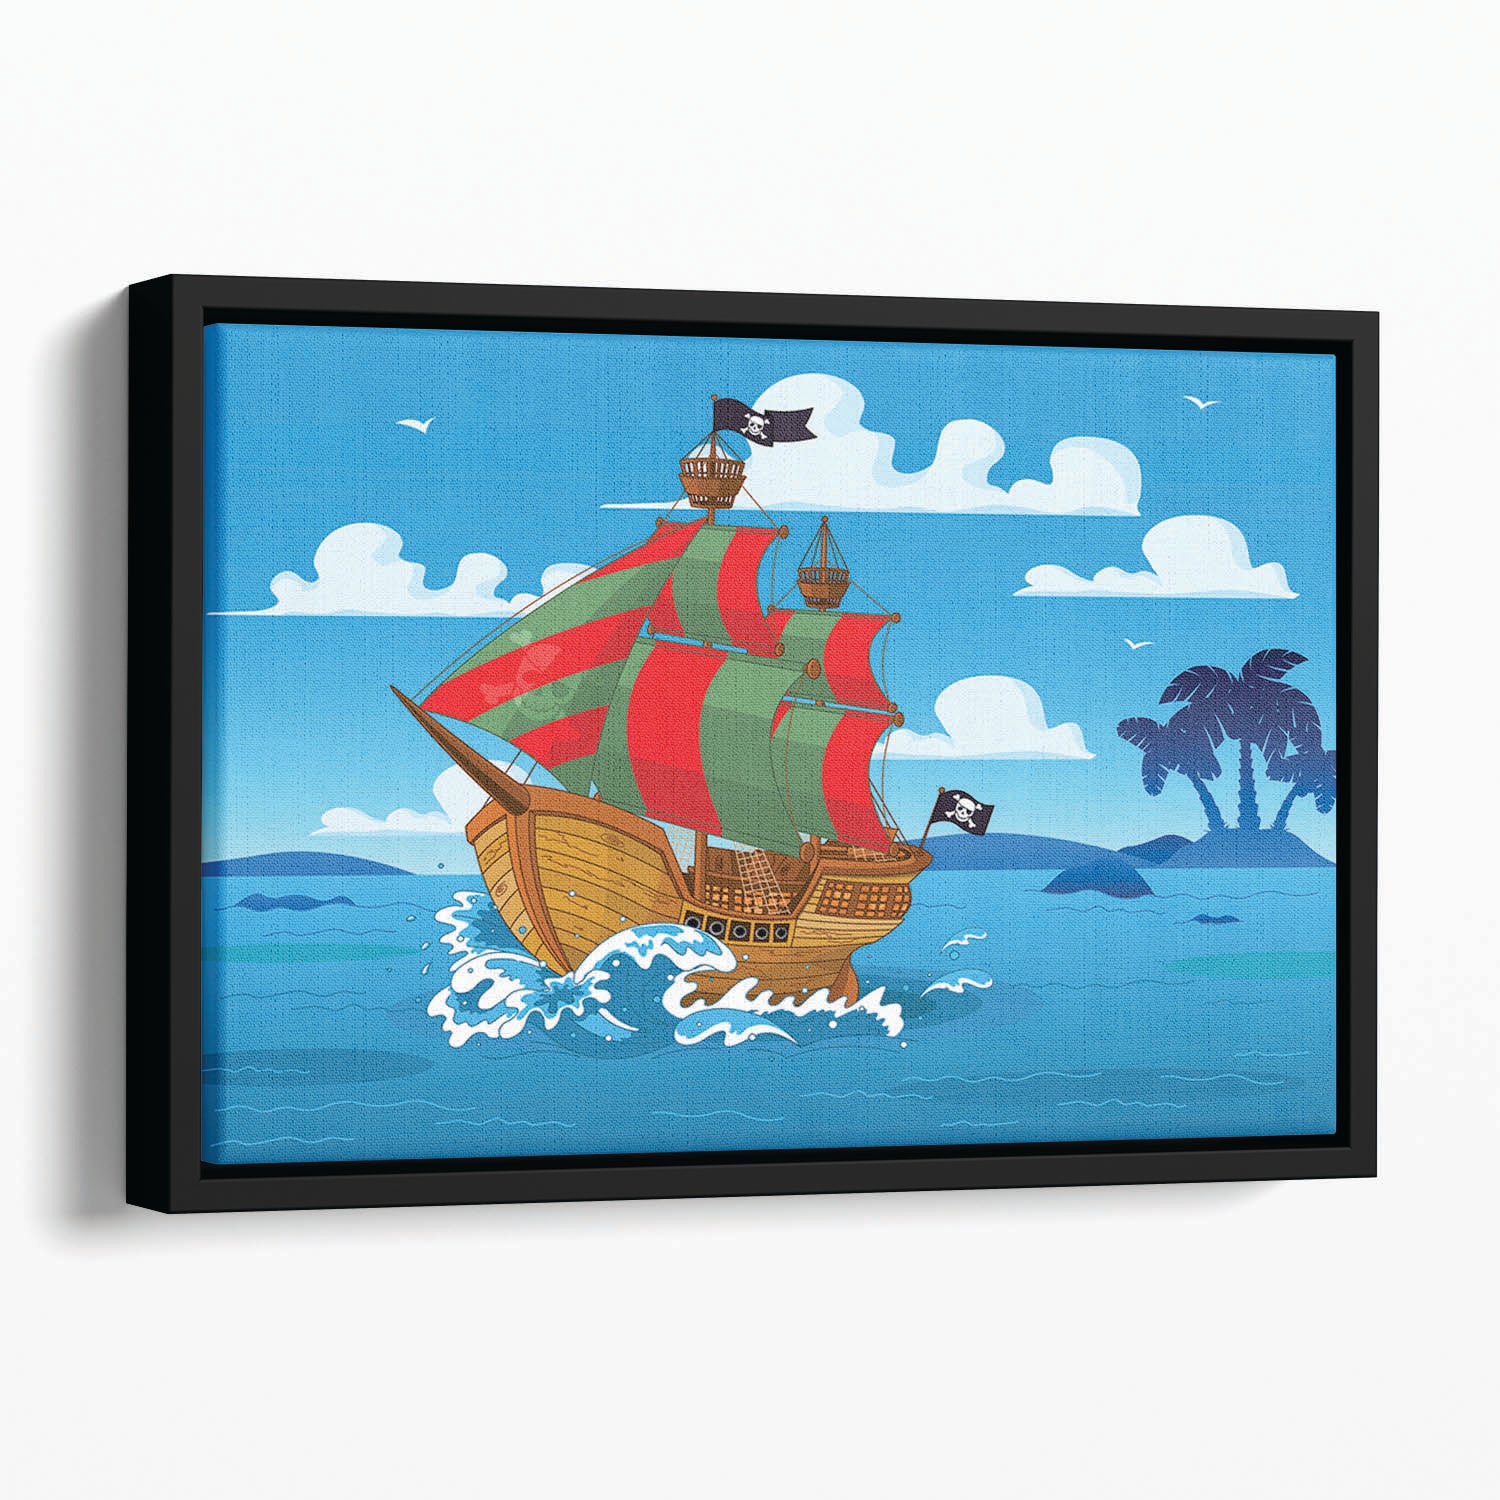 Pirate ship sails the seas Floating Framed Canvas